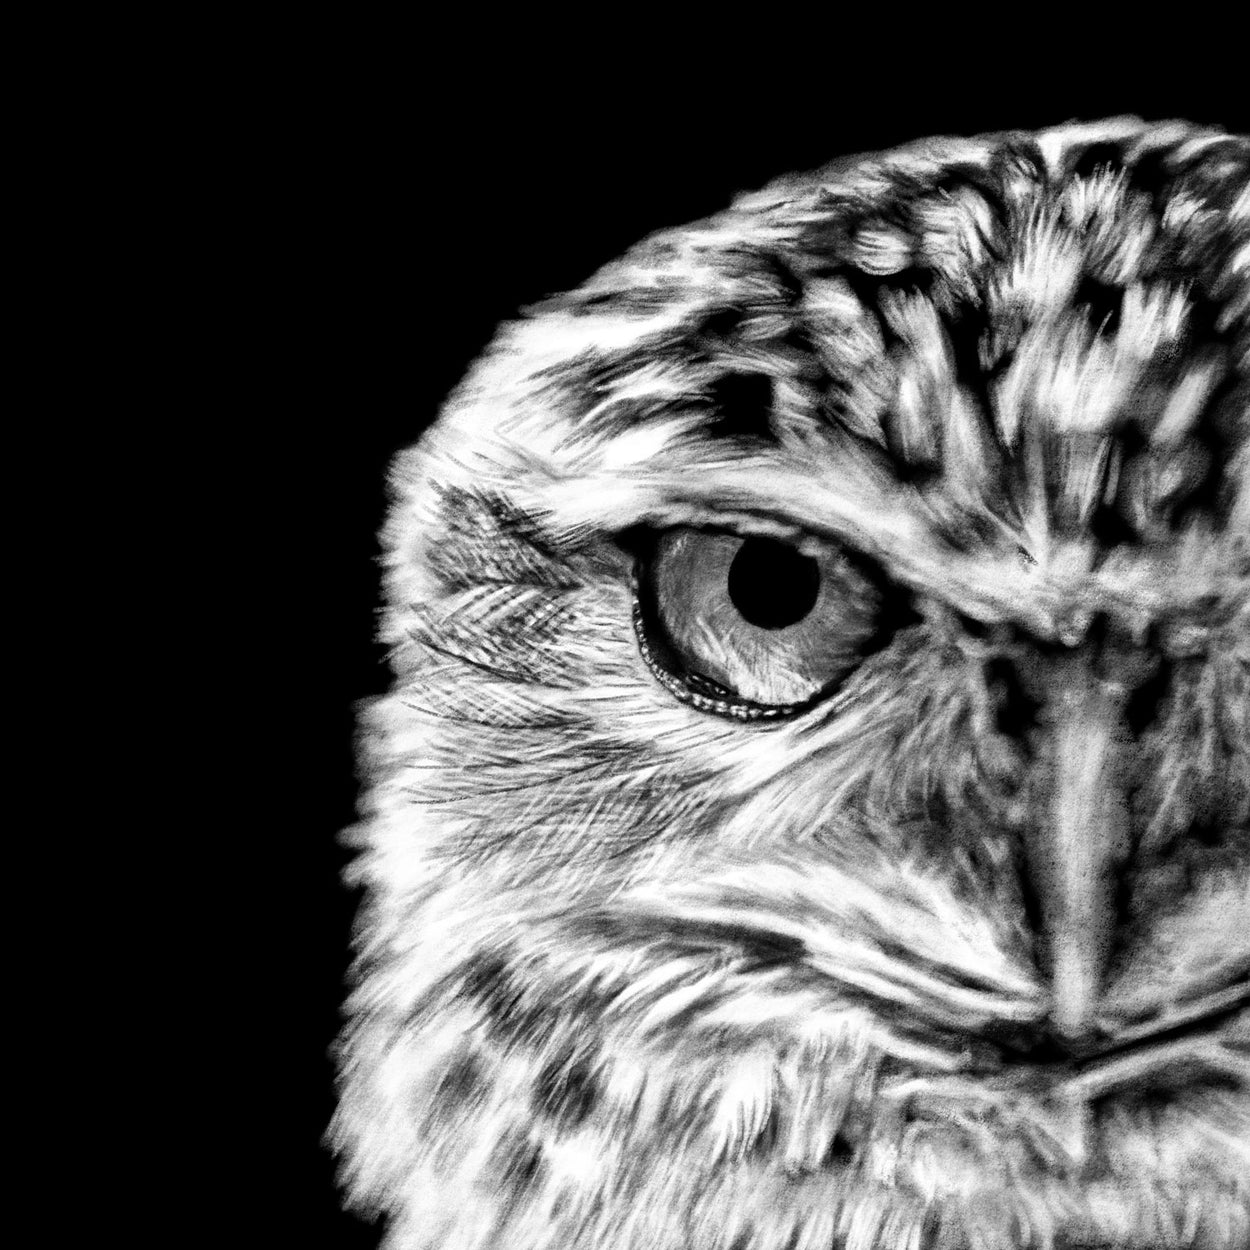 Burrowing Owl Procreate Digital Drawing Close-up - The Thriving Wild